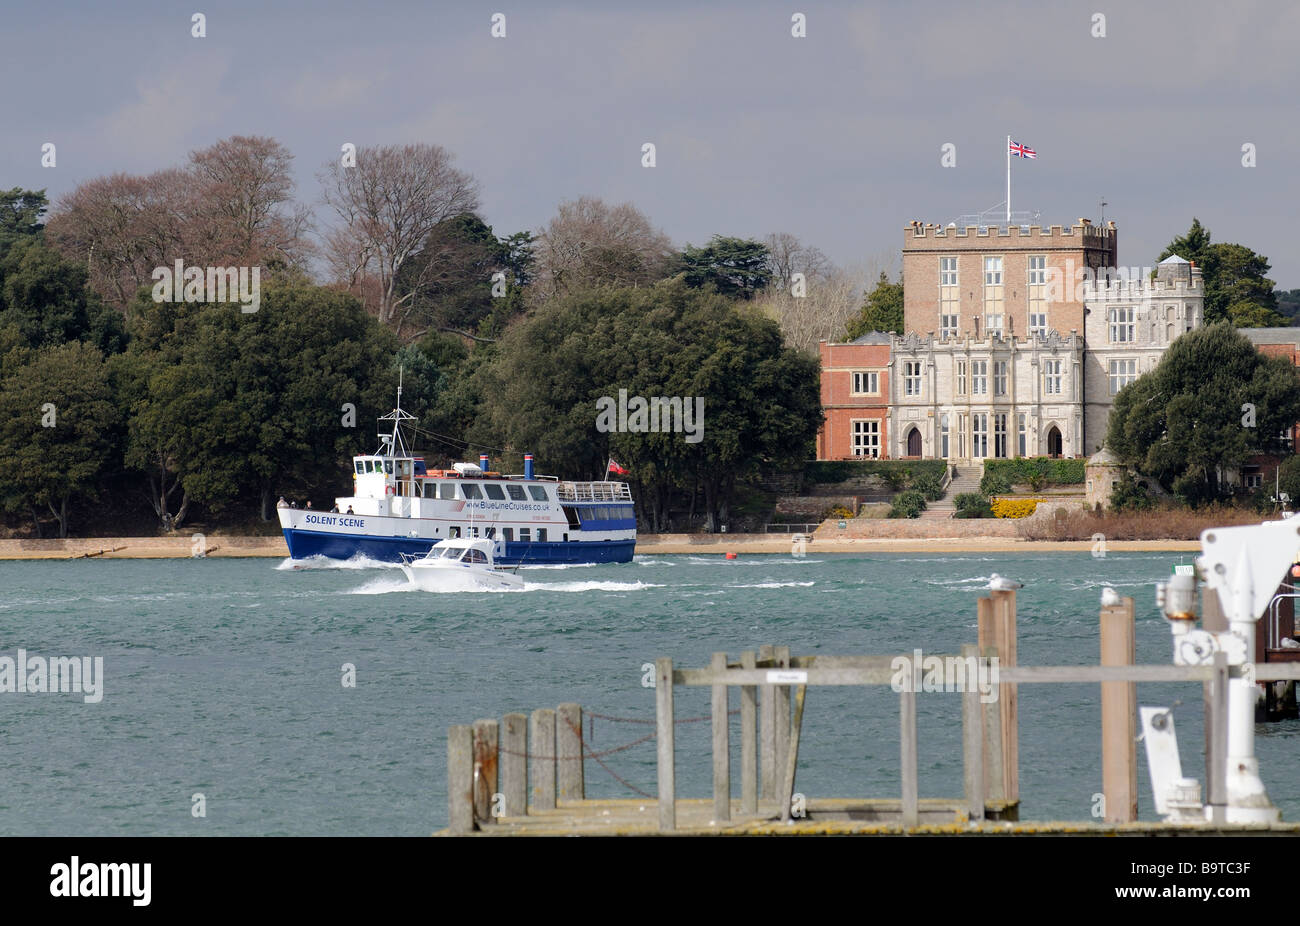 Branksea Castle on Brownsea Island Dorset England UK The castle is owned by the John Lewis Partnership Stock Photo